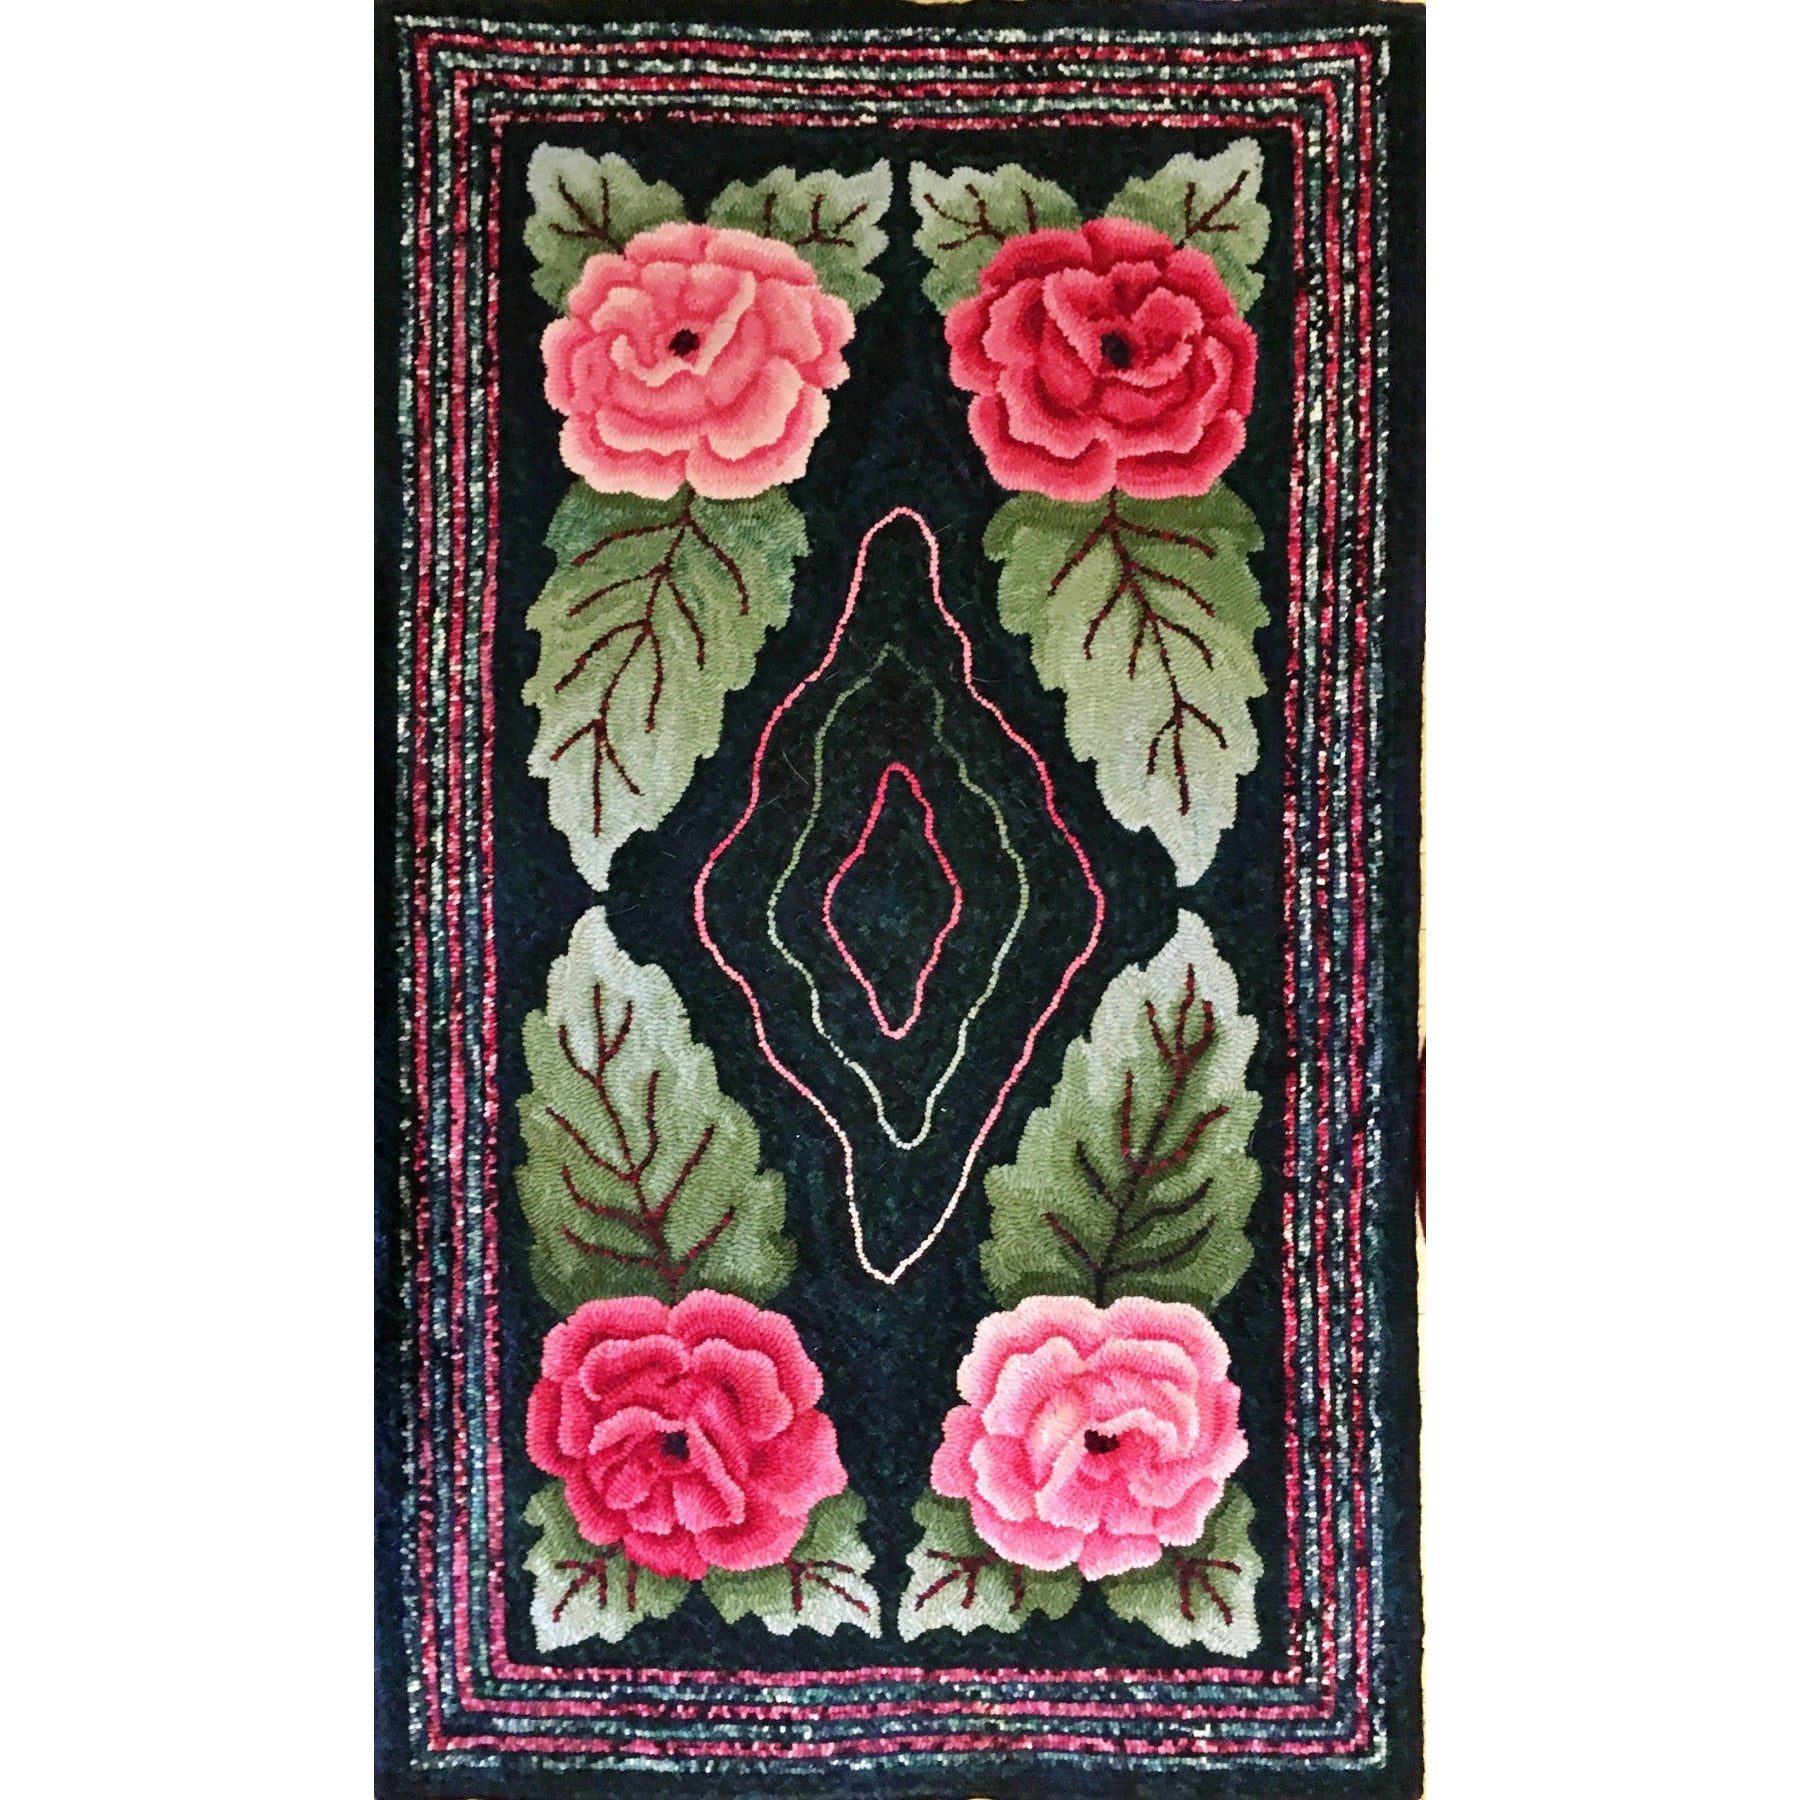 Reunion Roses, rug hooked by Alma Coia